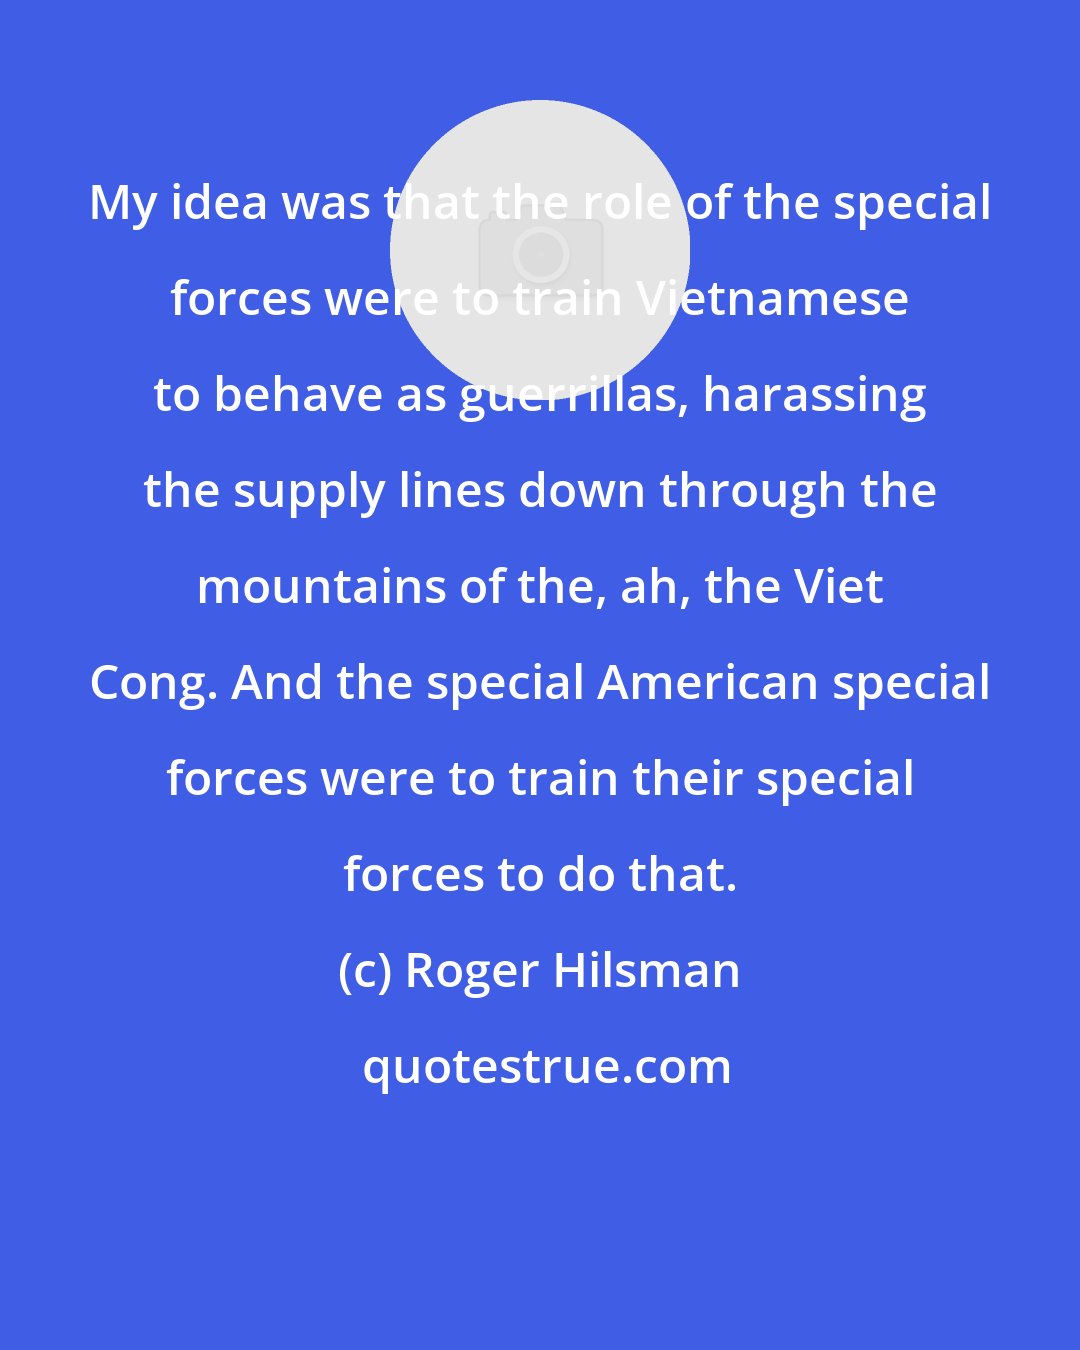 Roger Hilsman: My idea was that the role of the special forces were to train Vietnamese to behave as guerrillas, harassing the supply lines down through the mountains of the, ah, the Viet Cong. And the special American special forces were to train their special forces to do that.